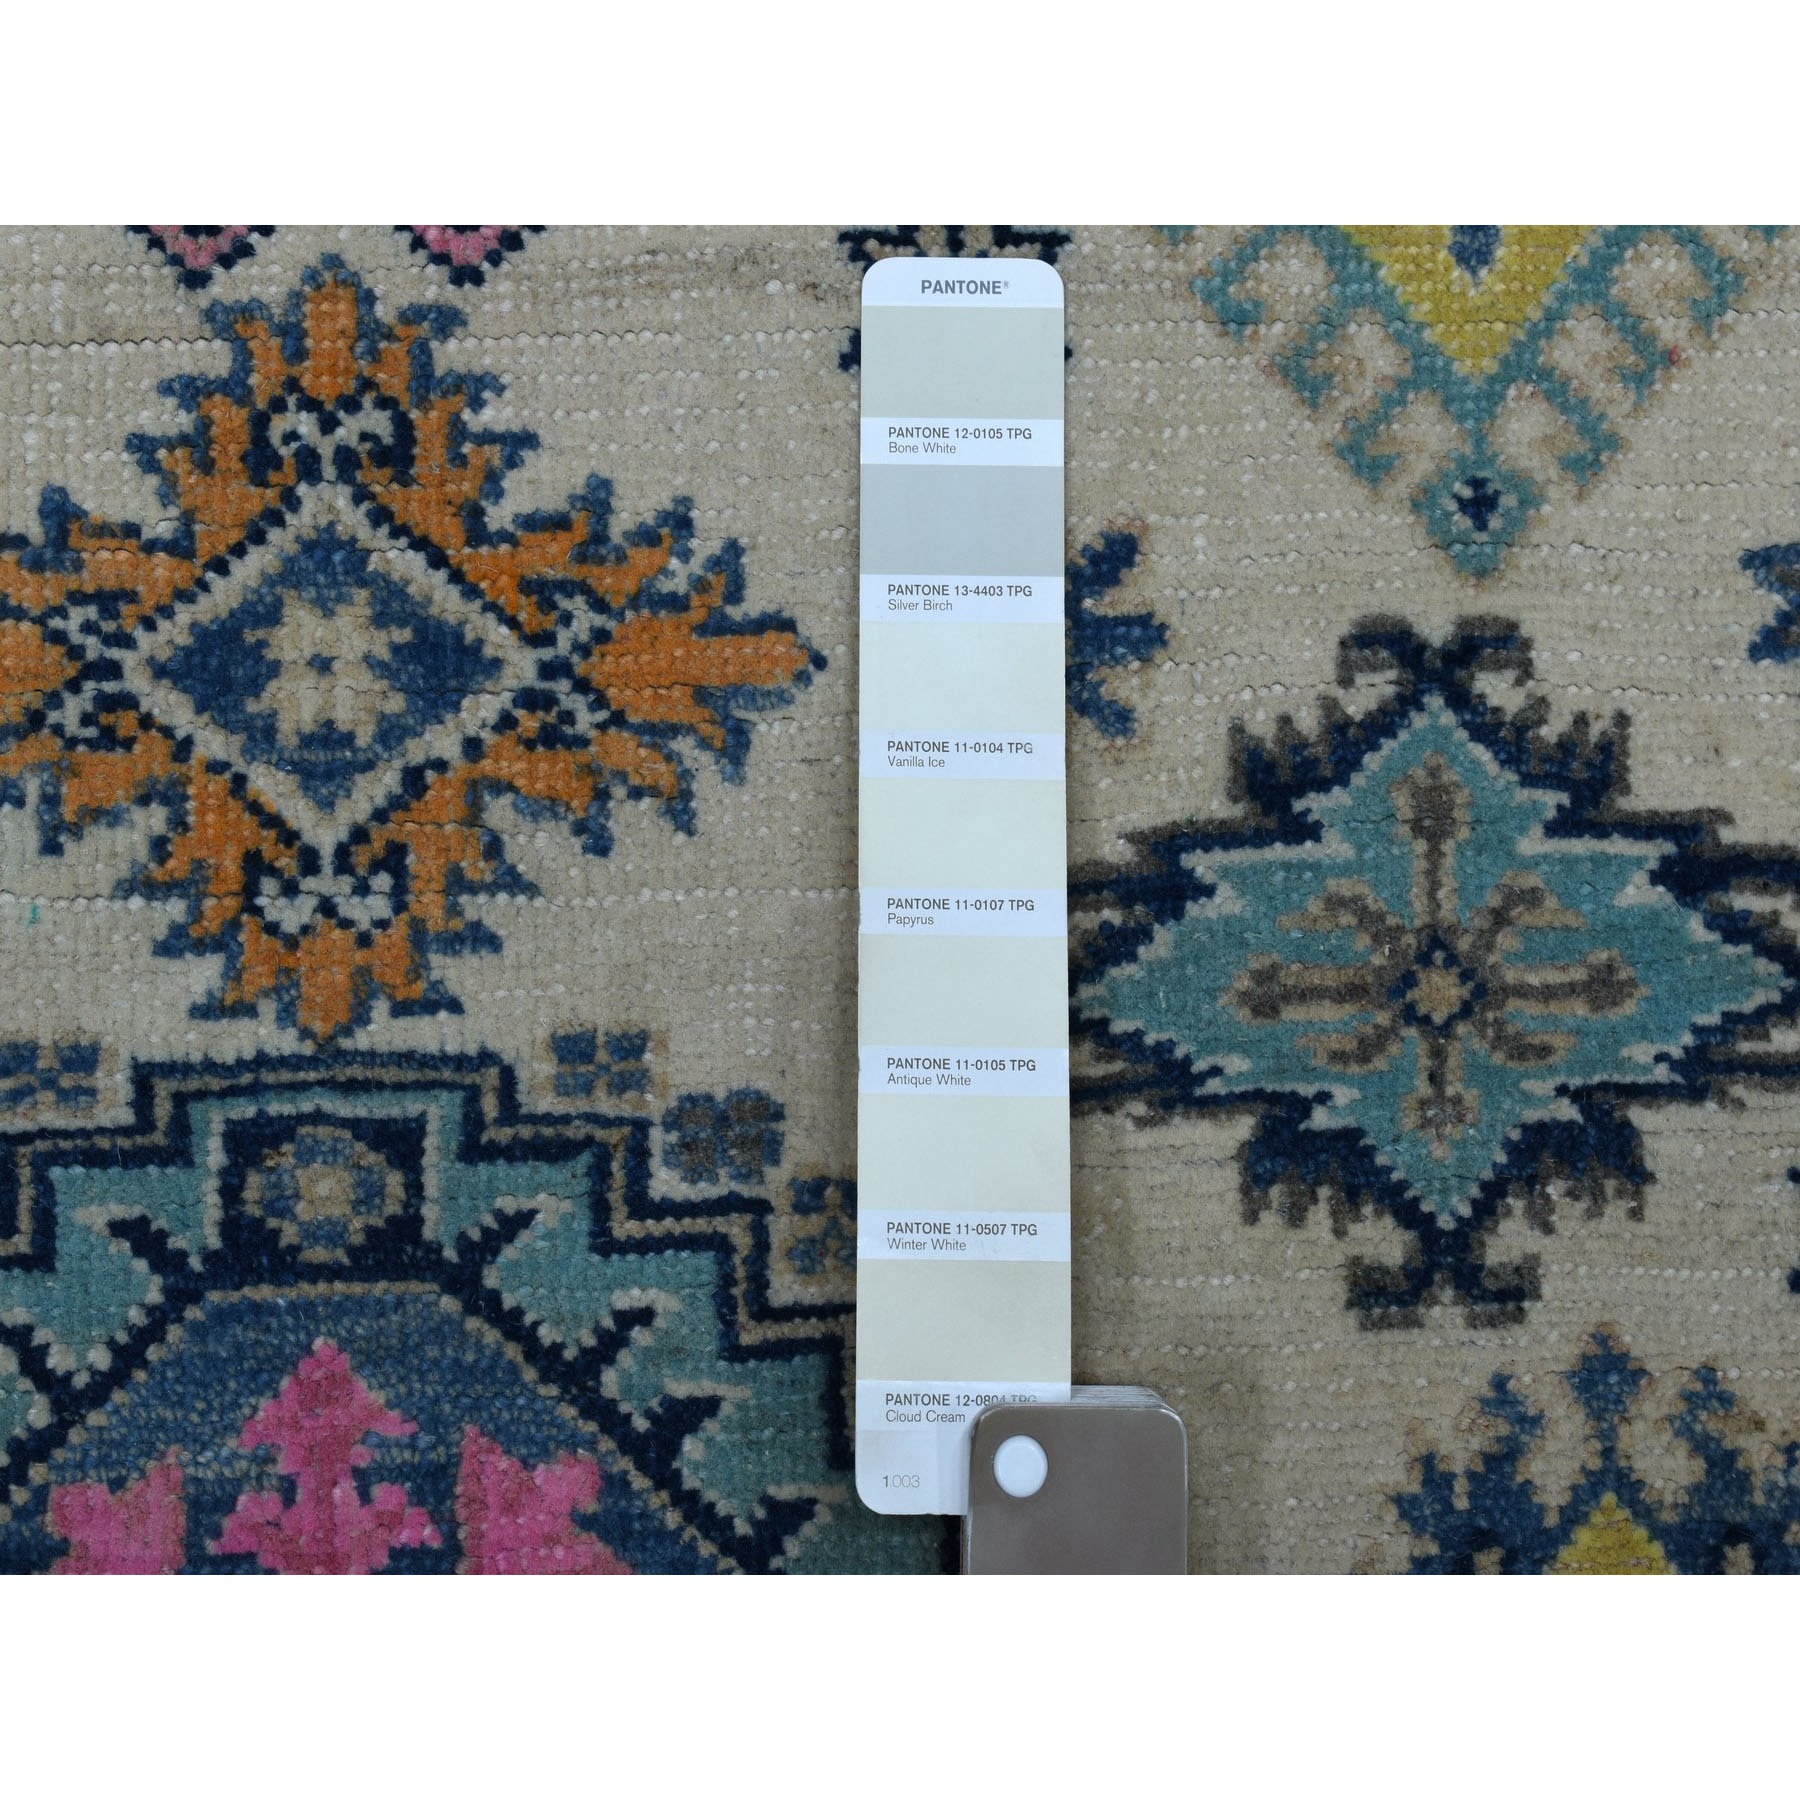 4-x5-6  Colorful Ivory Fusion Kazak Pure Wool Geometric Design Hand Knotted Oriental Rug 